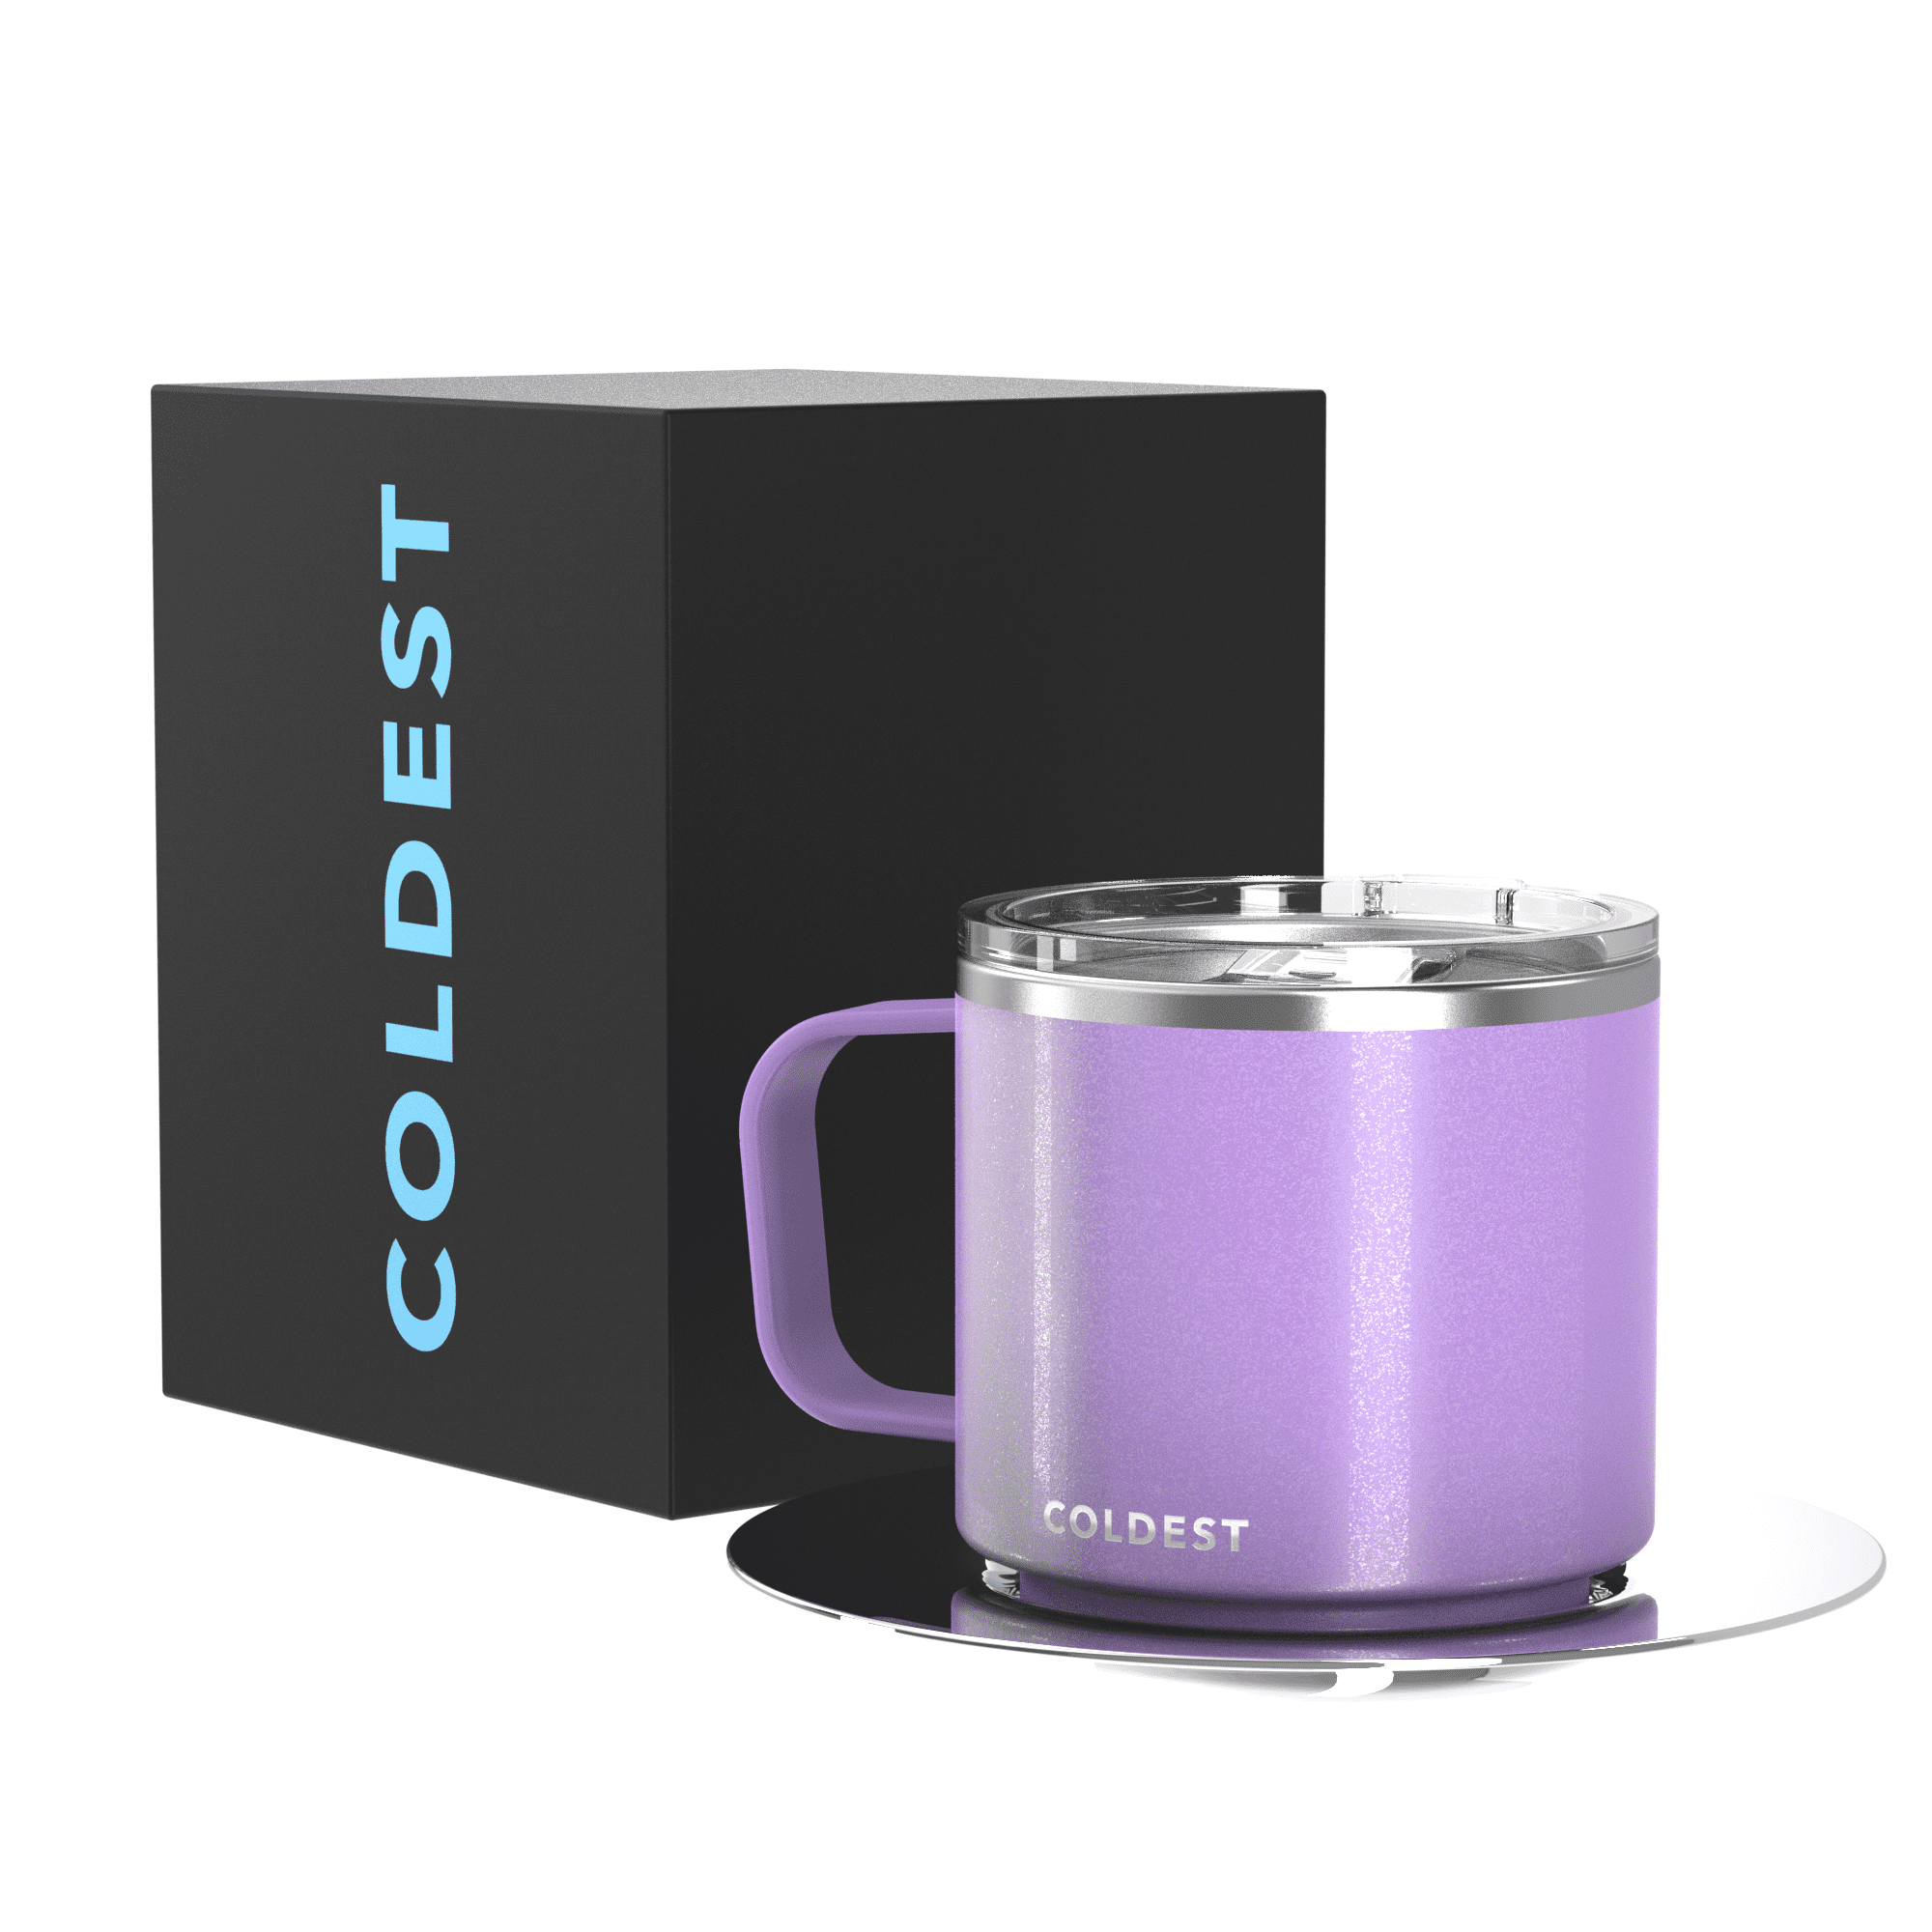 Car Travel Coffee Mug Insulated Coffee Cups to Go with for Keep Hot Cold  Ice Tea Drinks Reusable Tea…See more Car Travel Coffee Mug Insulated Coffee